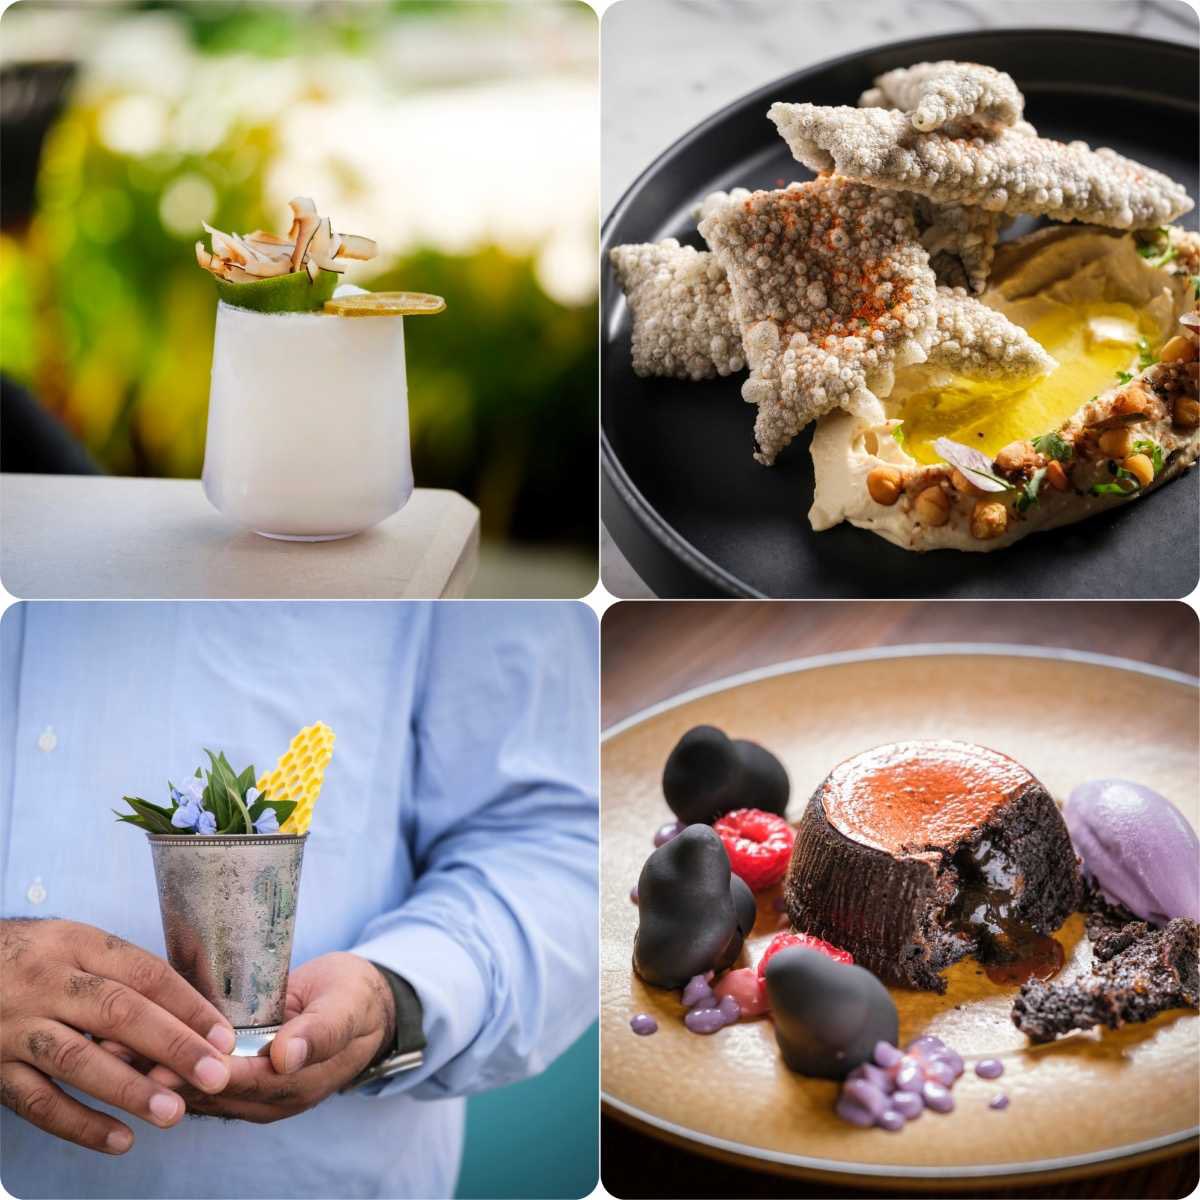 Hotel Indigo Grand Cayman Announces Innovative Dining Concepts In Leadup To Grand Opening In May 2024 #HotelIndigo #GrandCayman #CaymanIslands #restaurants #IHGHotels #foodandbevarage #hospitality #hozpitality #hozpitalityplus #hozpitalitygroup hozpitality.com/ihghotels/read…